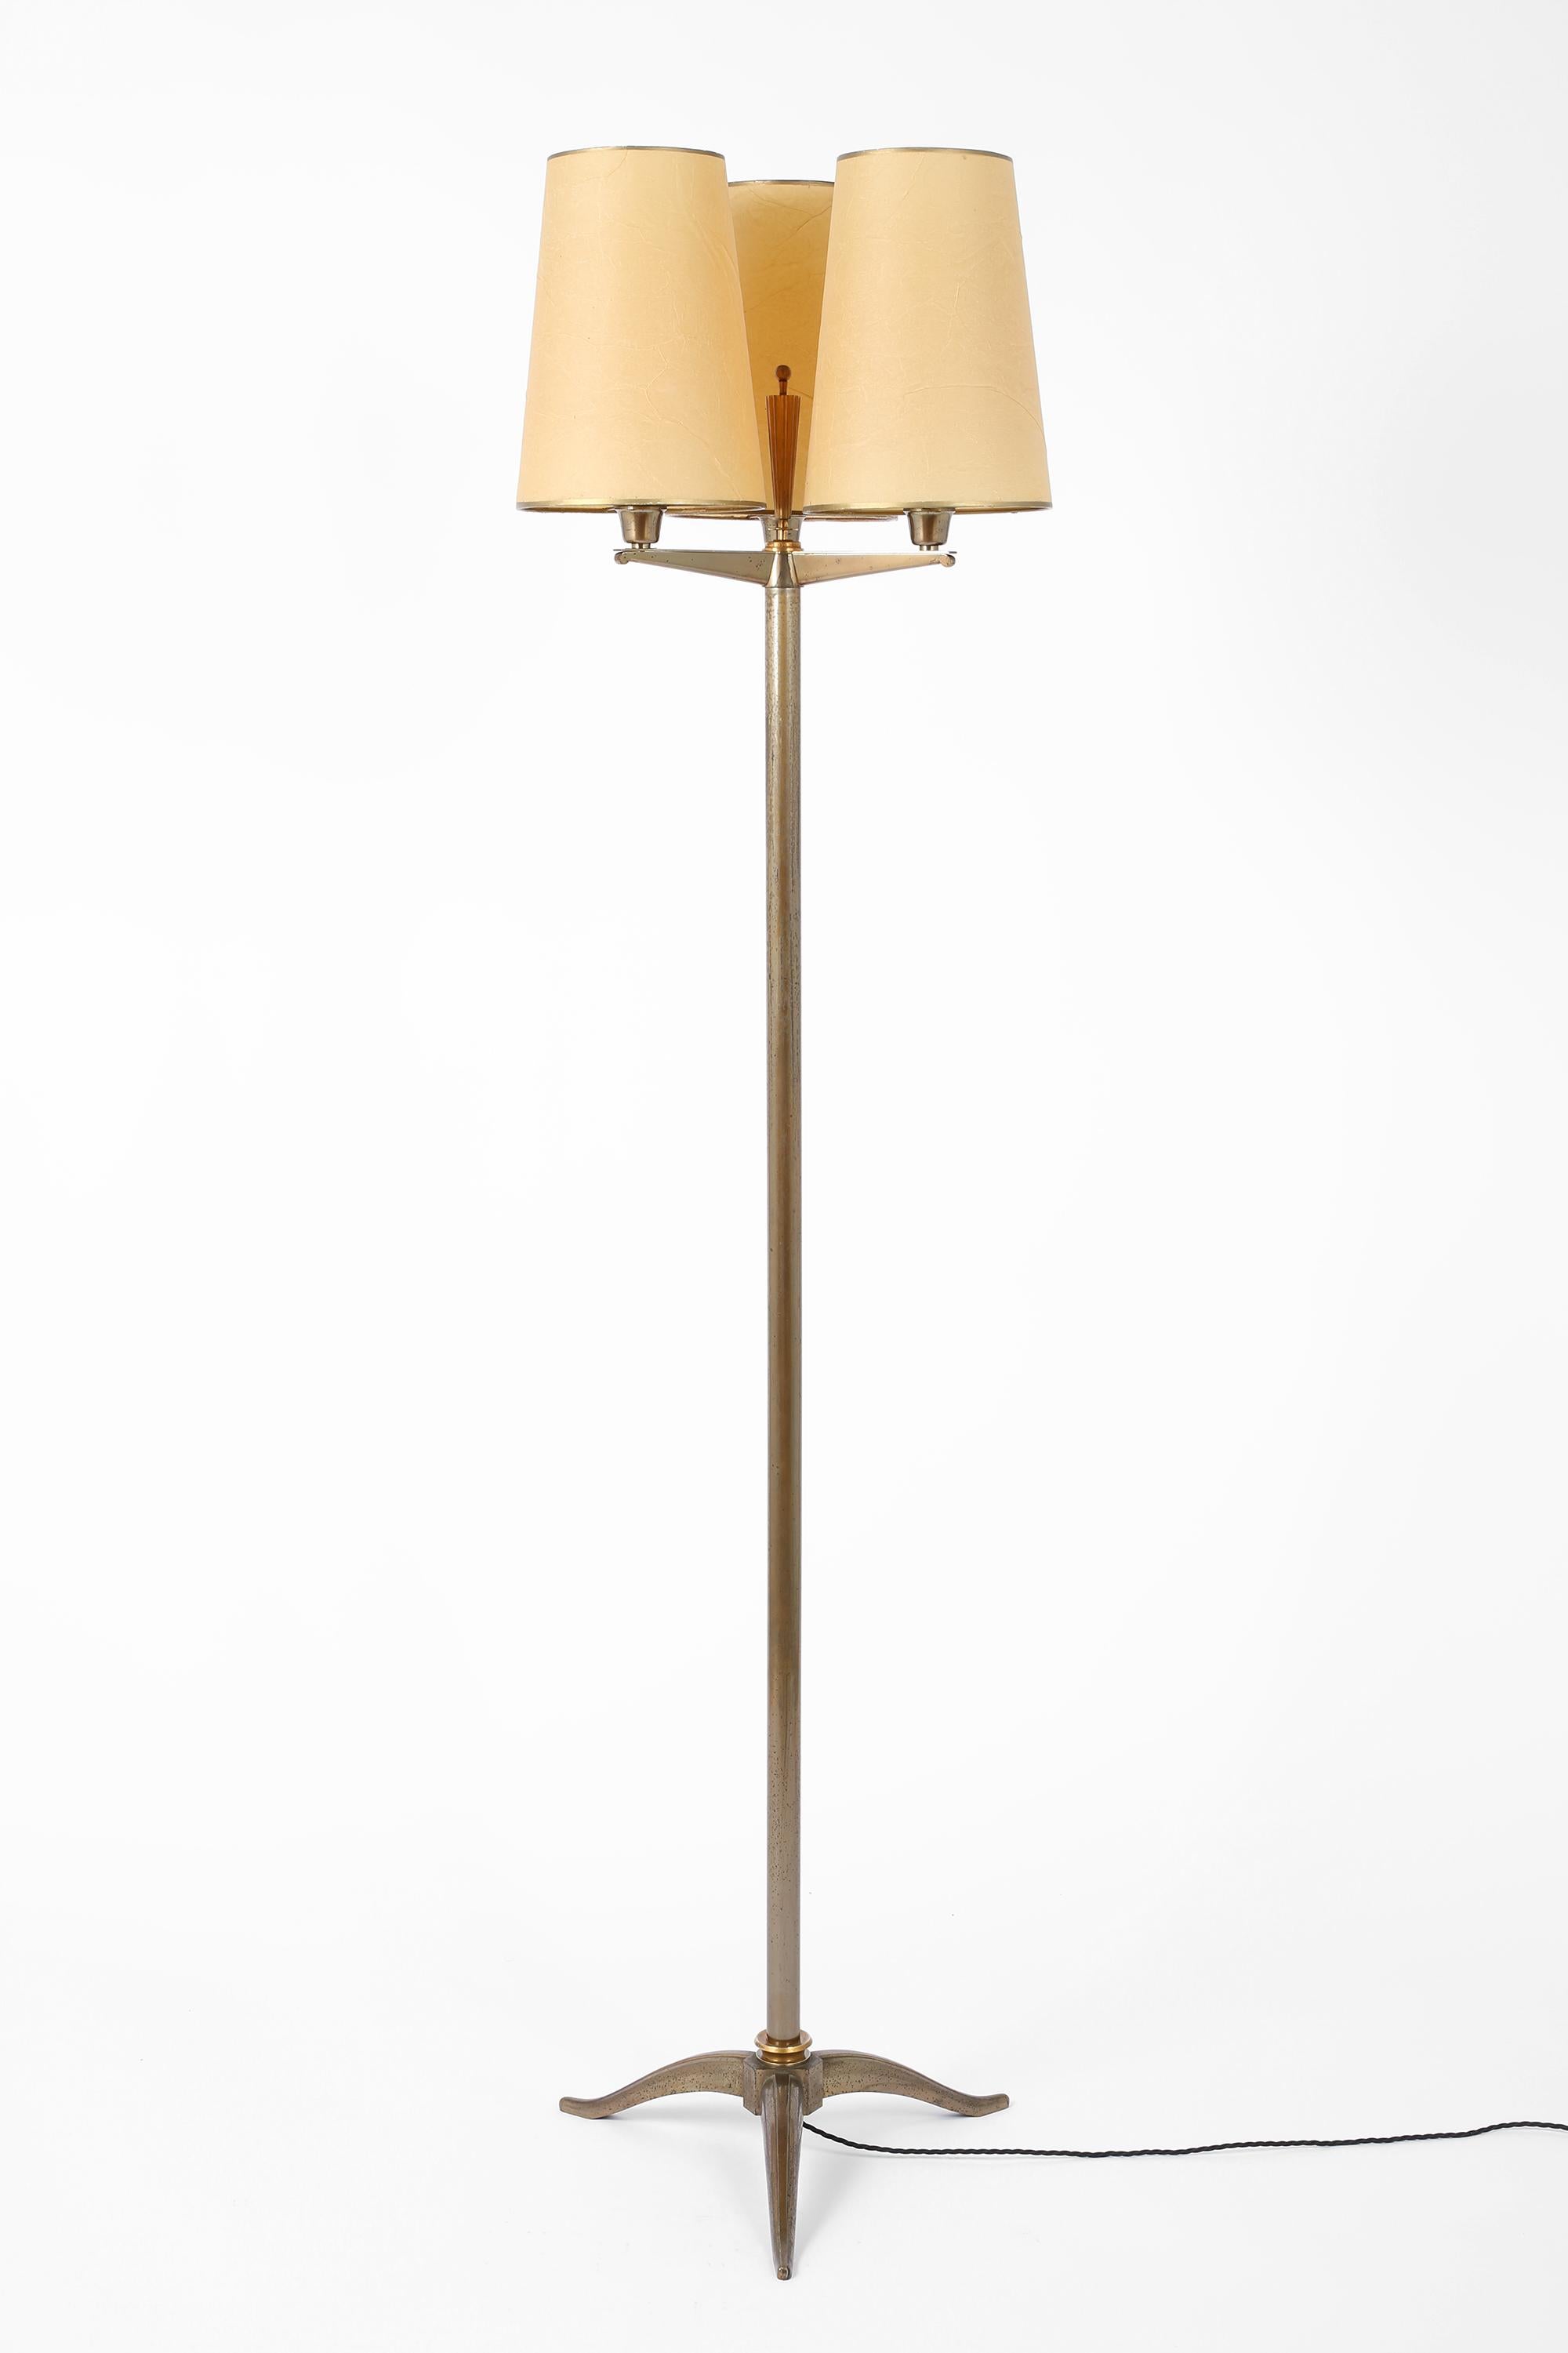 A fine Art Deco three headed bronze floor lamp attributed to Phillipe Genet & Lucien Michon. Of the highest quality; partially gilt with its original parchment shades. French, c. 1930.